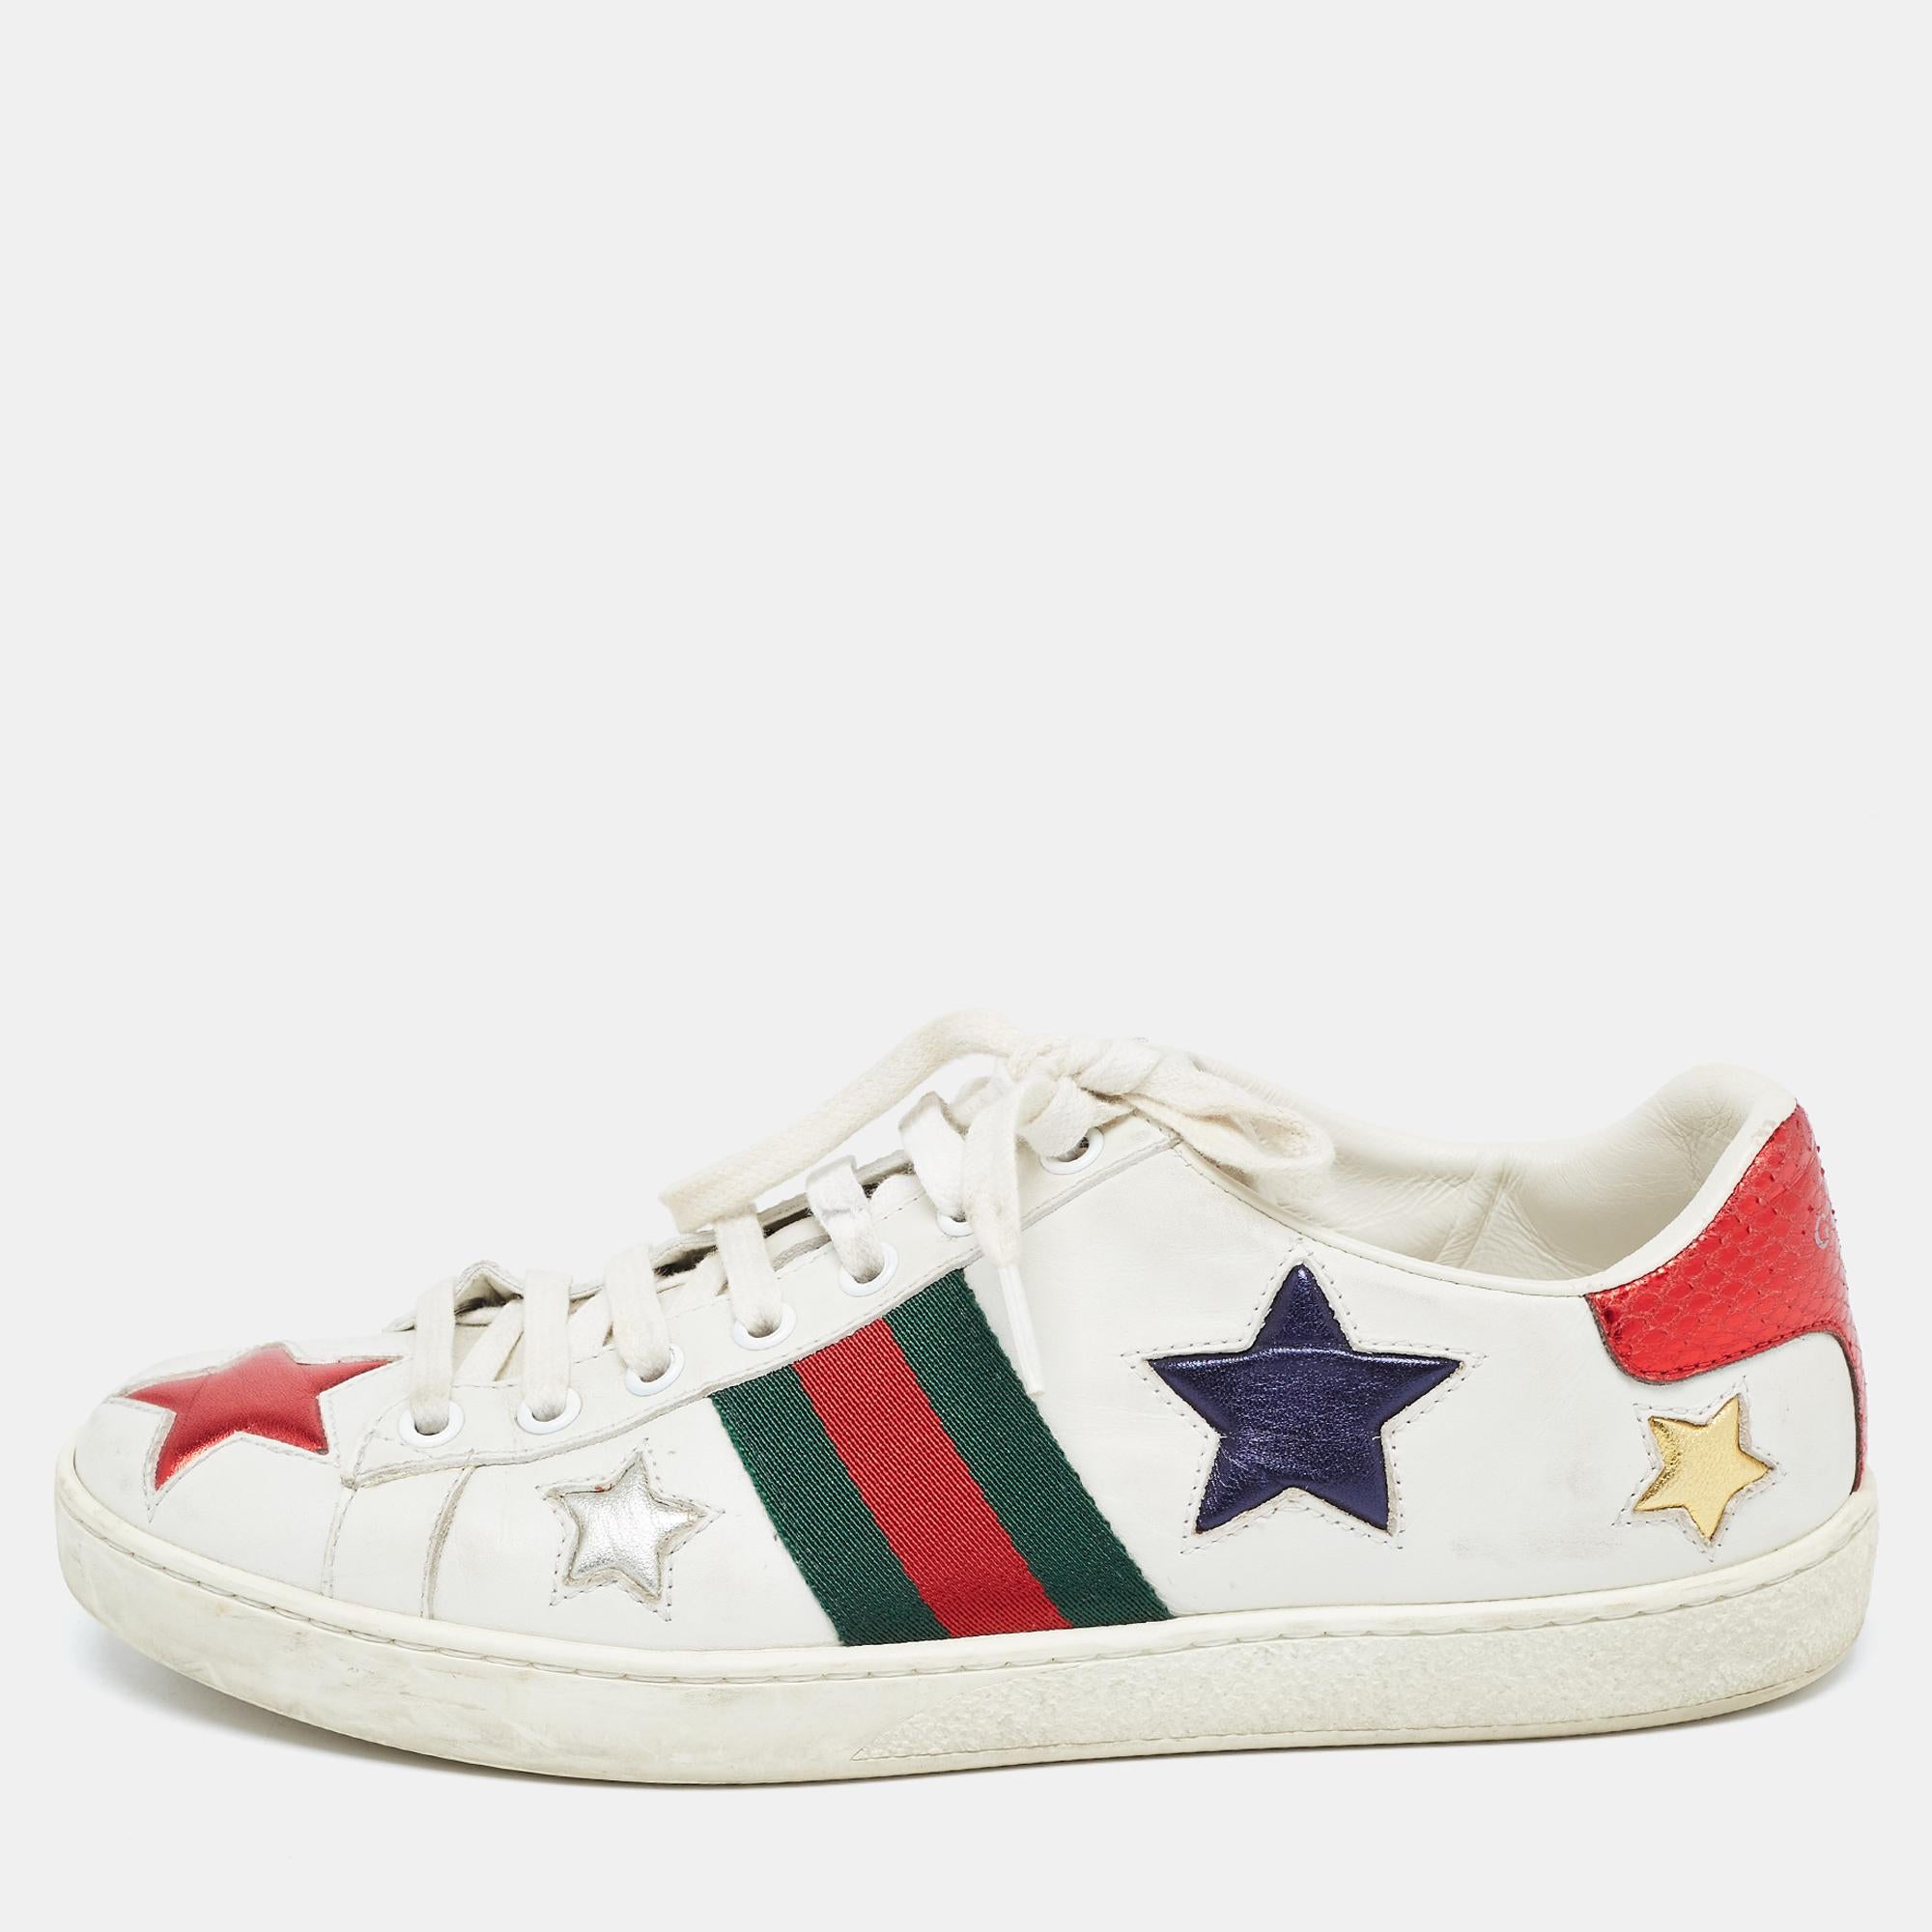 Gucci White Leather Ace Stars Low Top Sneakers Size 37.5 For Sale 4